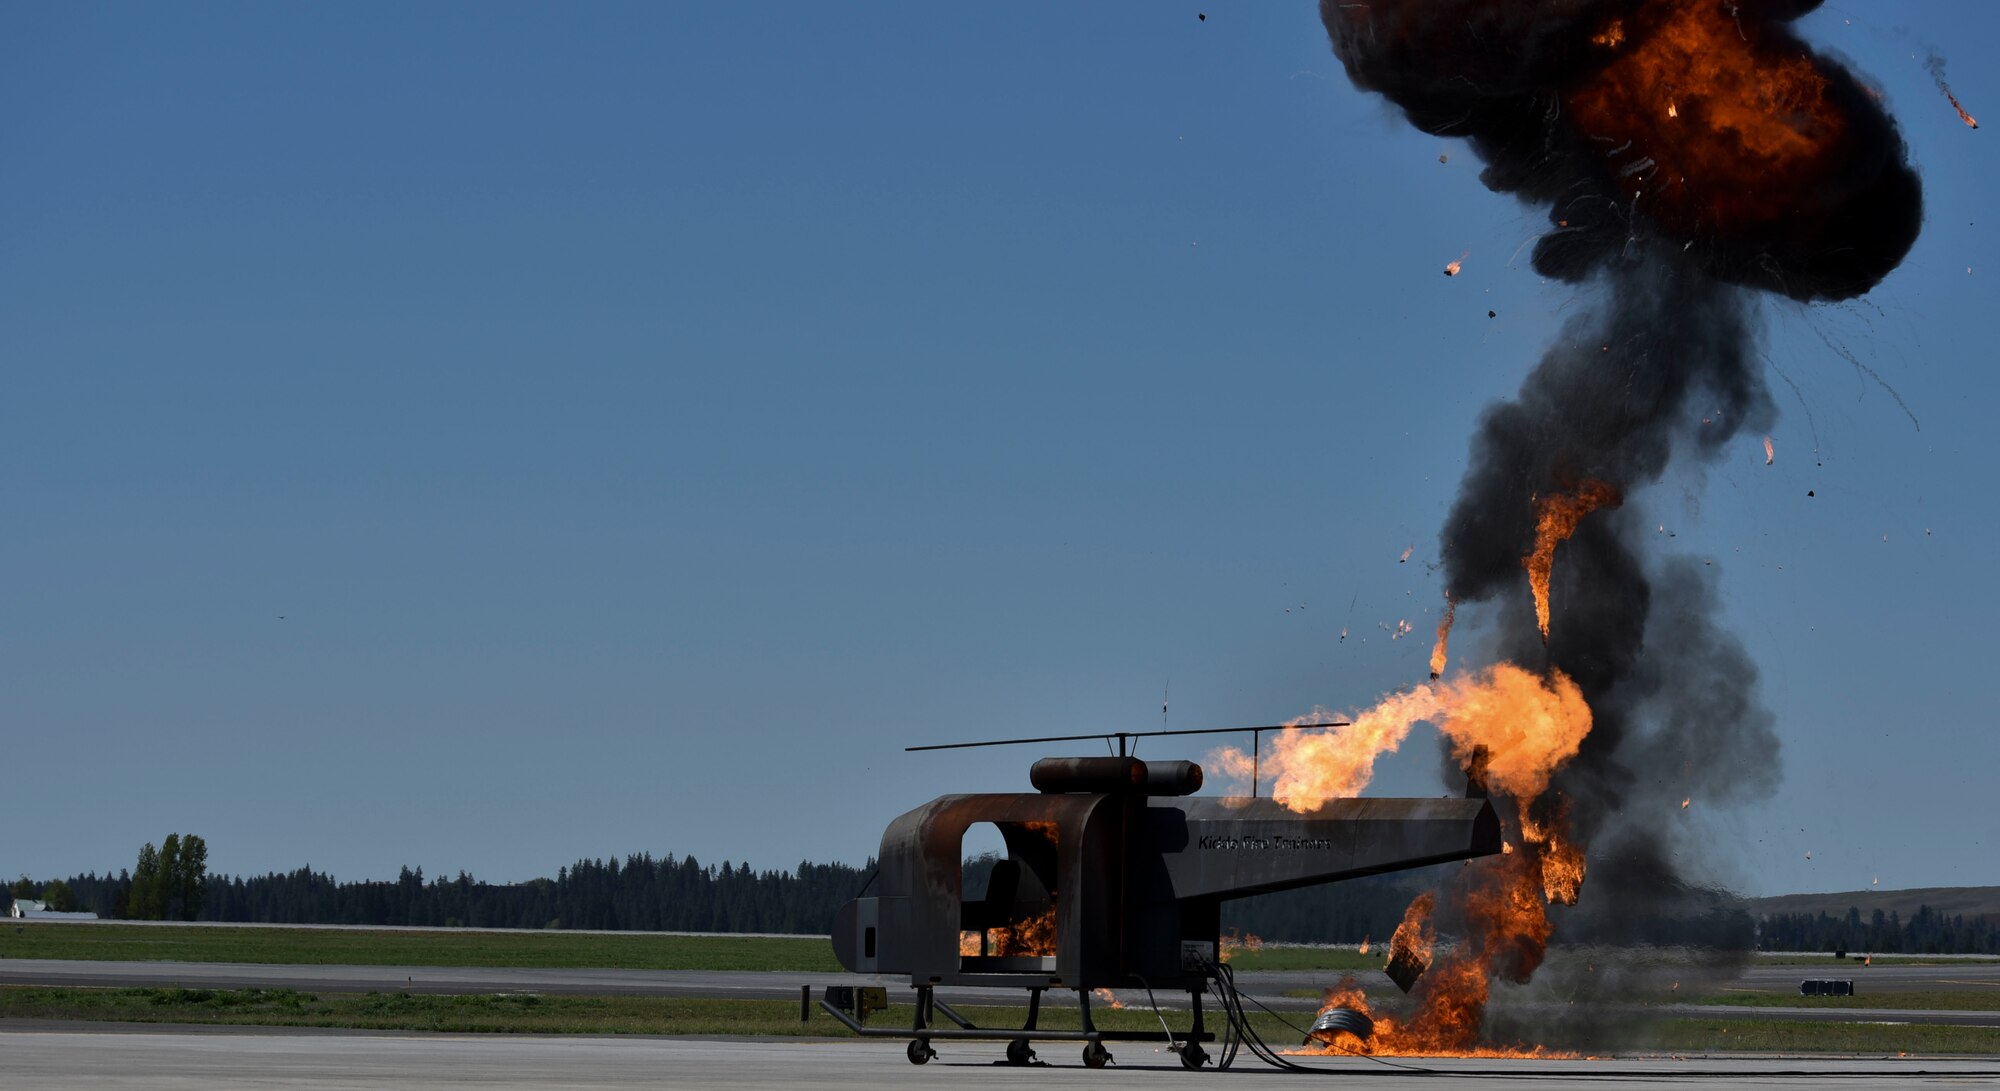 A helicopter crash trainer from Joint Base Lewis McChord, Washington, is on fire while Team Fairchild simulated an explosion during a Major Accident Response Exercise at Fairchild Air Force Base, May 9, 2019.